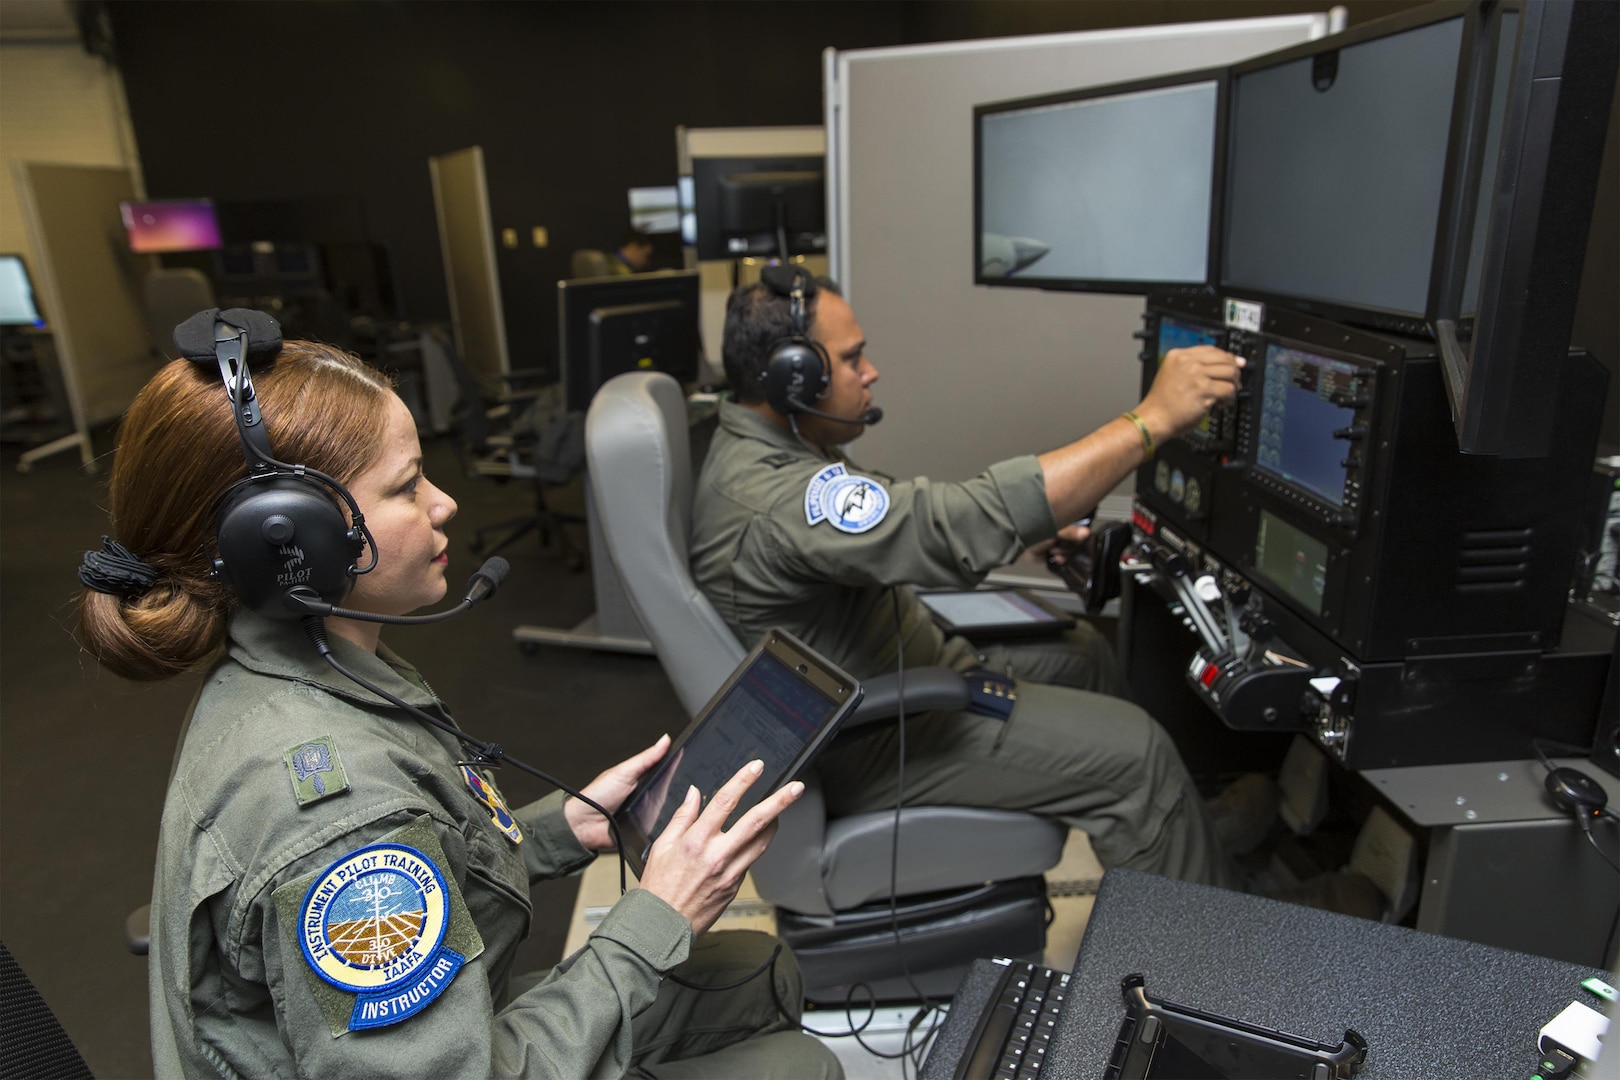 Maj. Maria Tejada-Quintana (left), a guest instructor at the Inter-American Air Forces Academy at Joint Base San Antonio-Lackland, oversees a student's flight simulation Oct 3, 2017. Tejada-Quintana is the only female flight guest instructor teaching international students from partner nations in the Western Hemisphere.